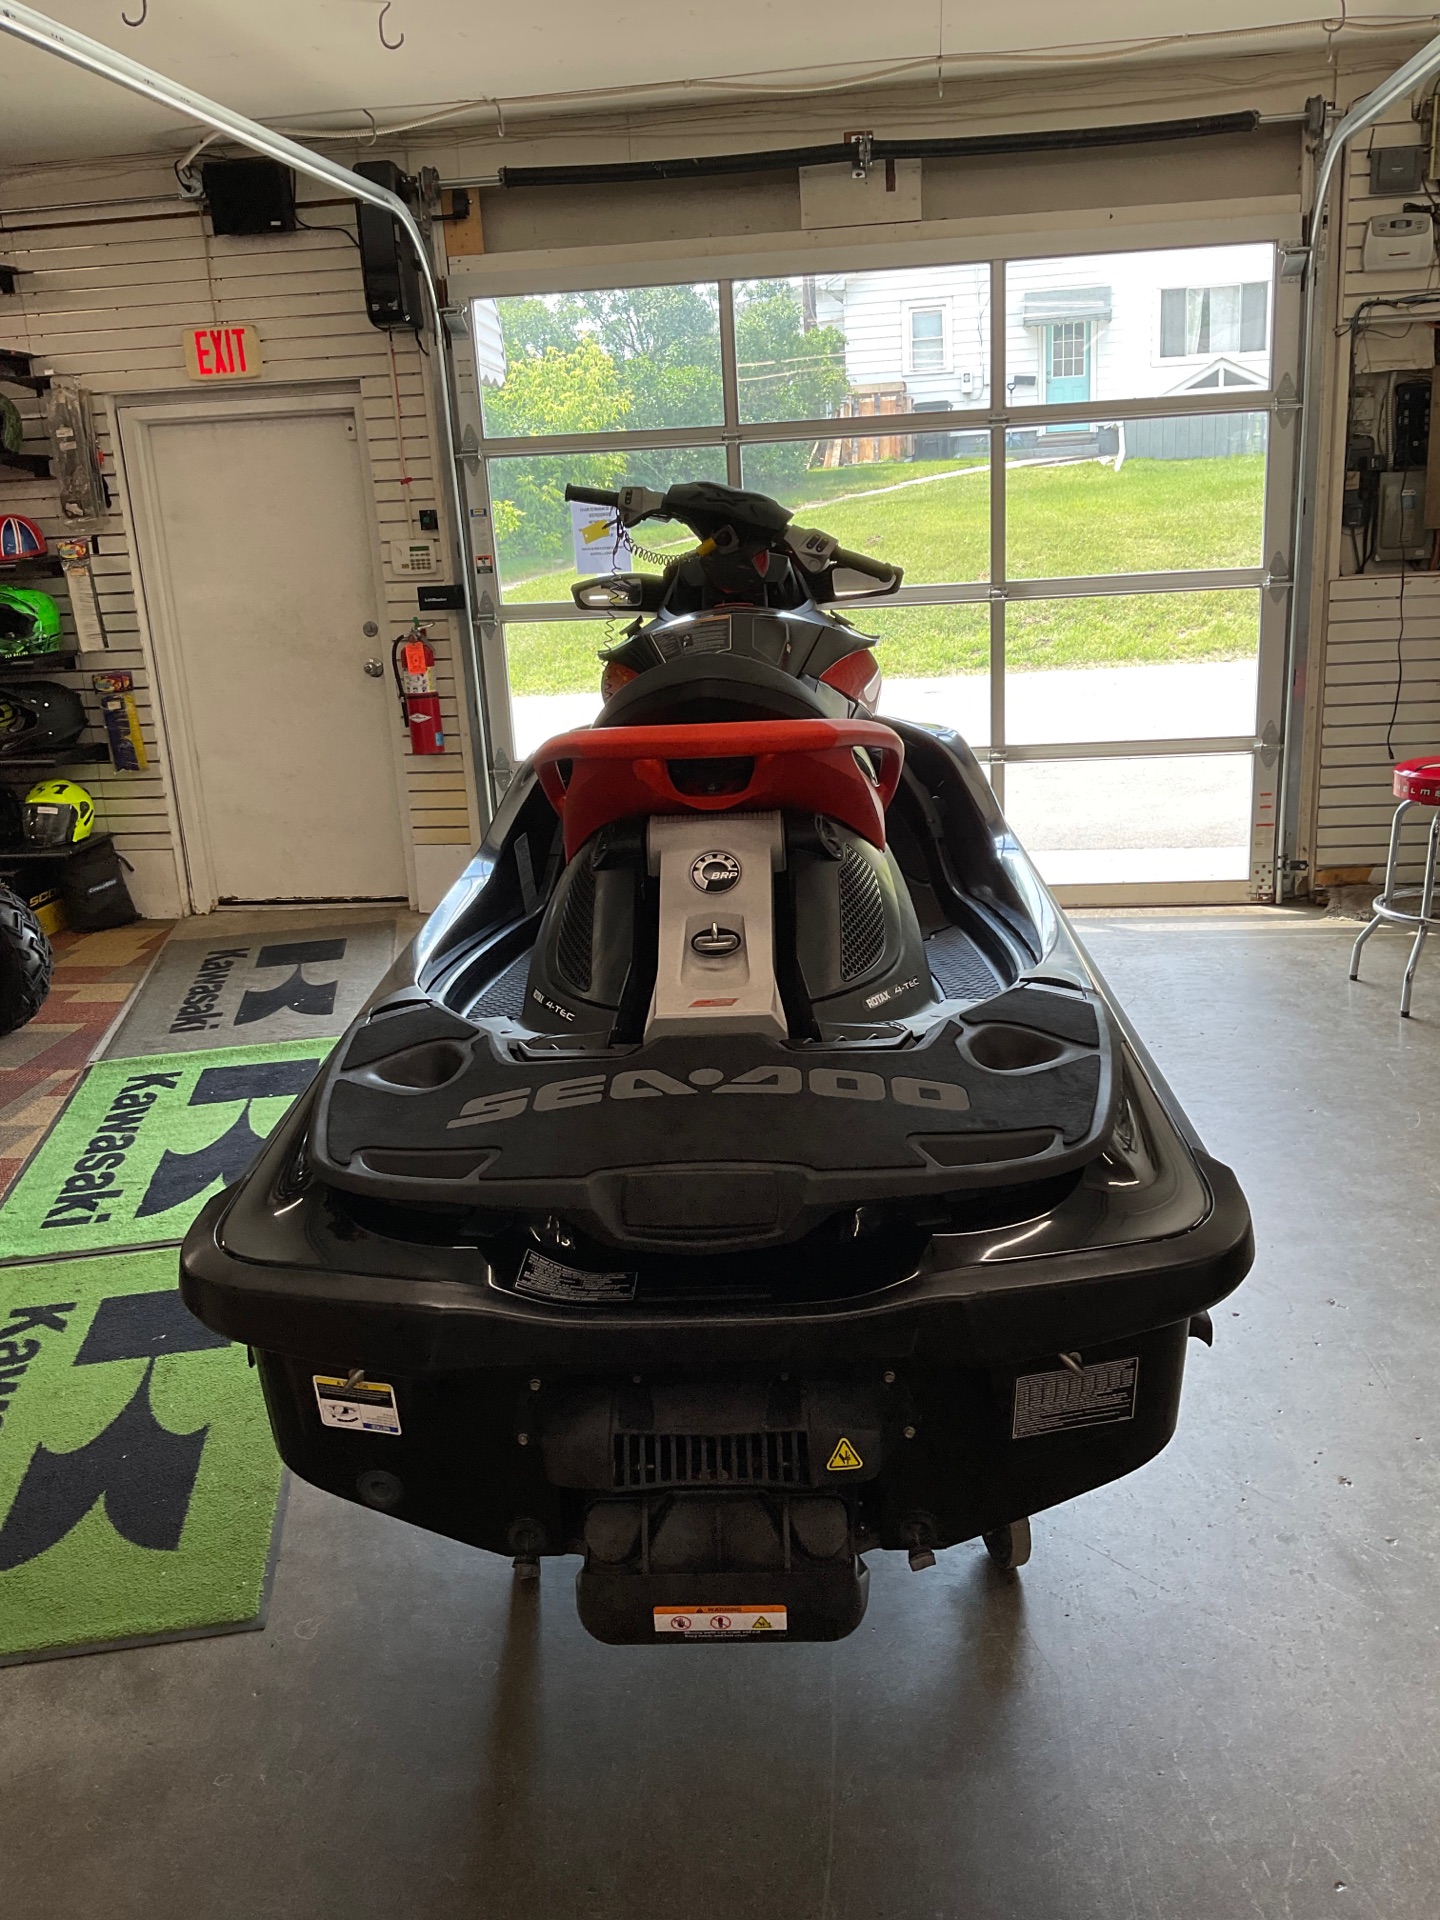 2011 Sea-Doo RXT AS 260 in Howell, Michigan - Photo 4